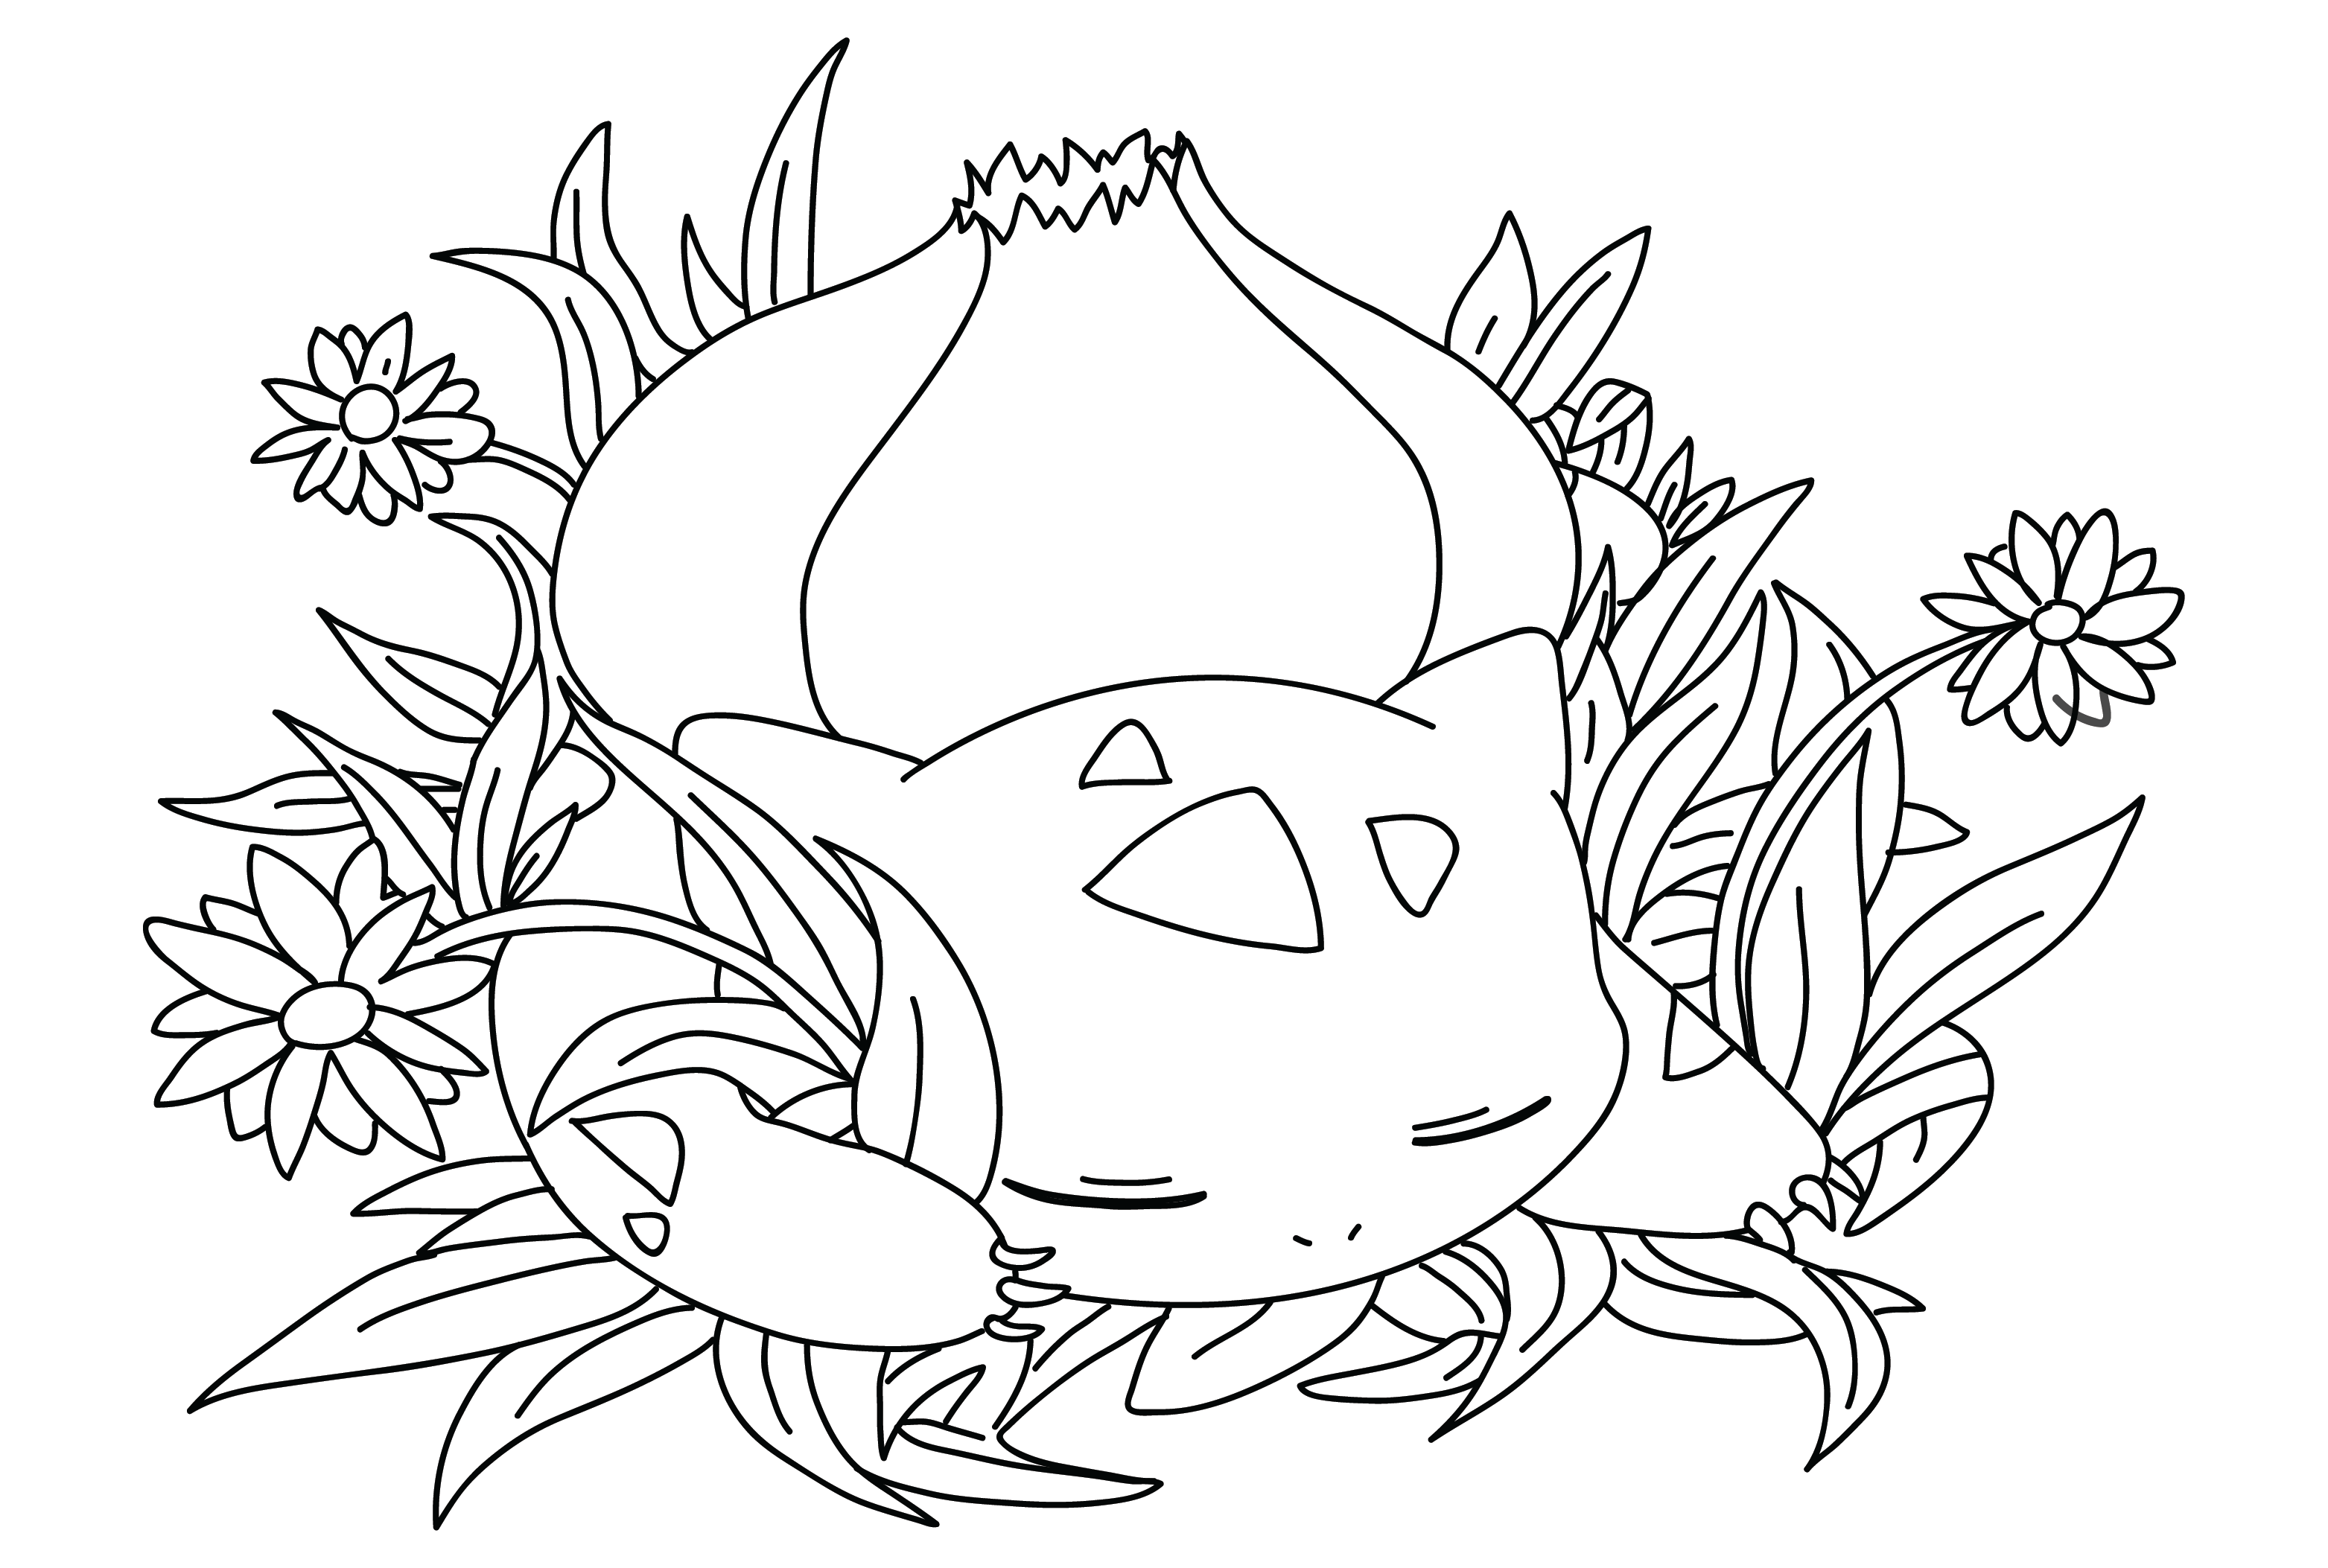 Printable Bulbasaur Coloring Page from Bulbasaur